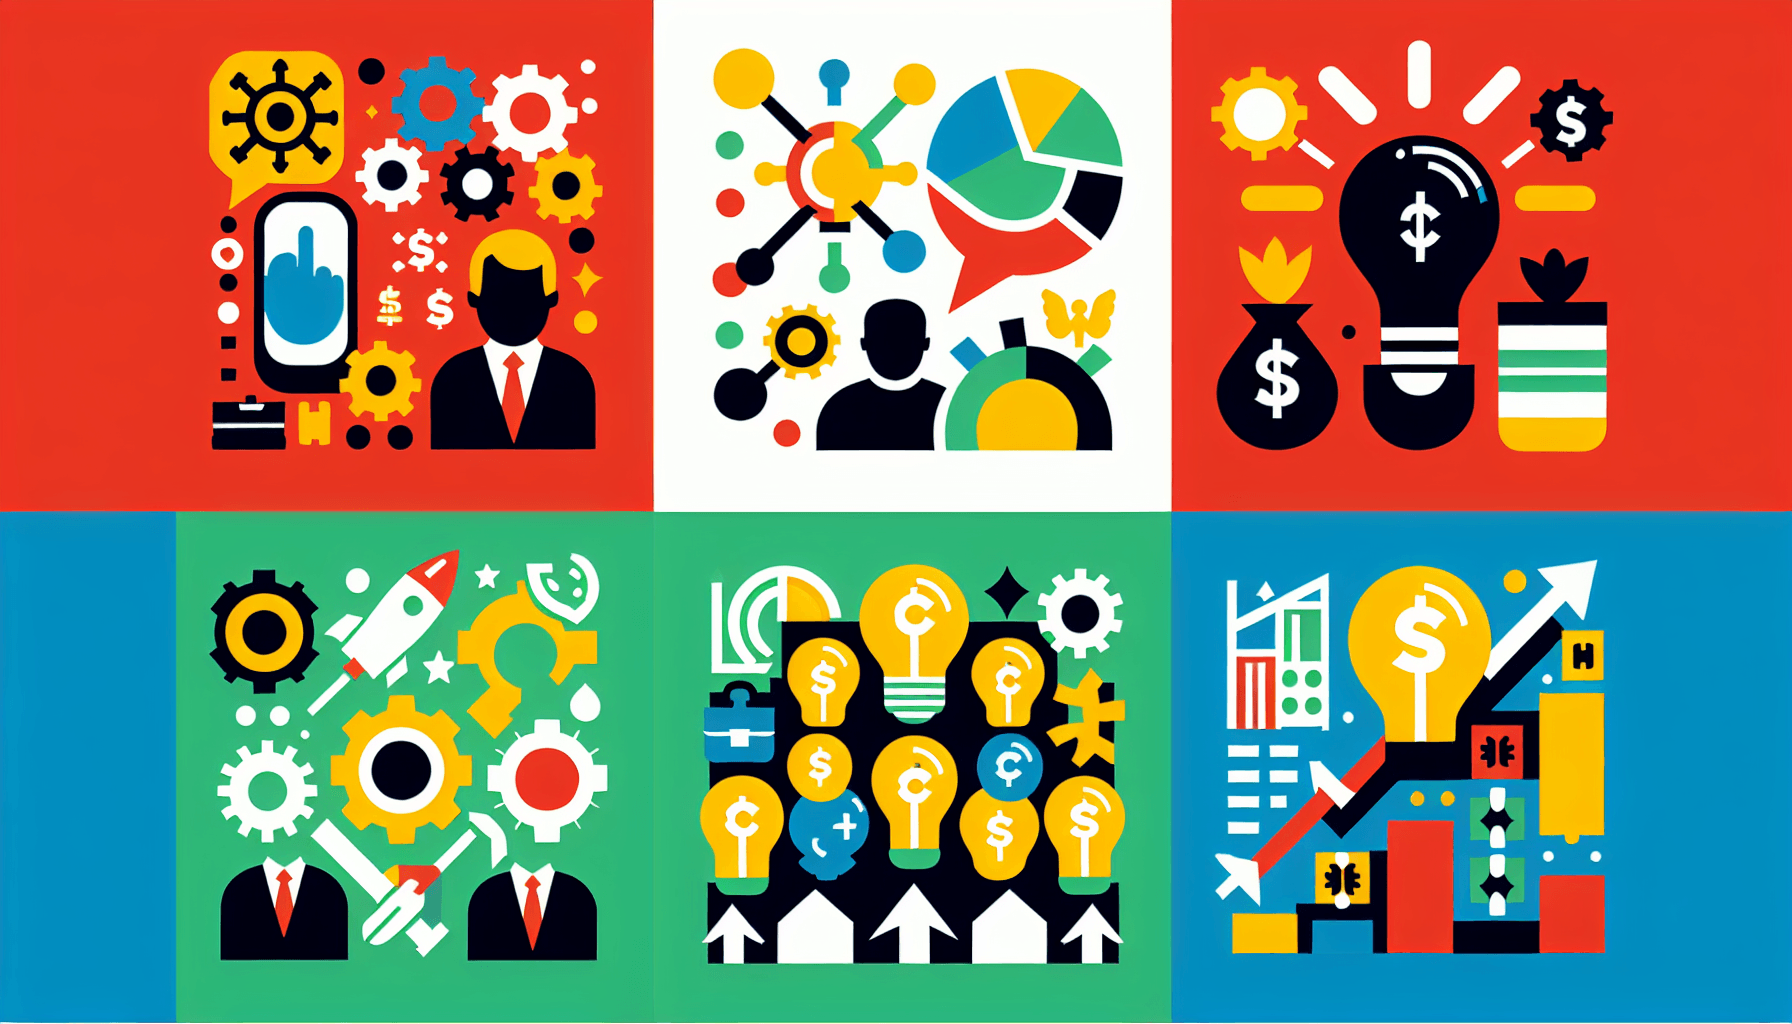 What is the meaning of entrepreneurship? in flat illustration style and white background, red #f47574, green #88c7a8, yellow #fcc44b, and blue #645bc8 colors.